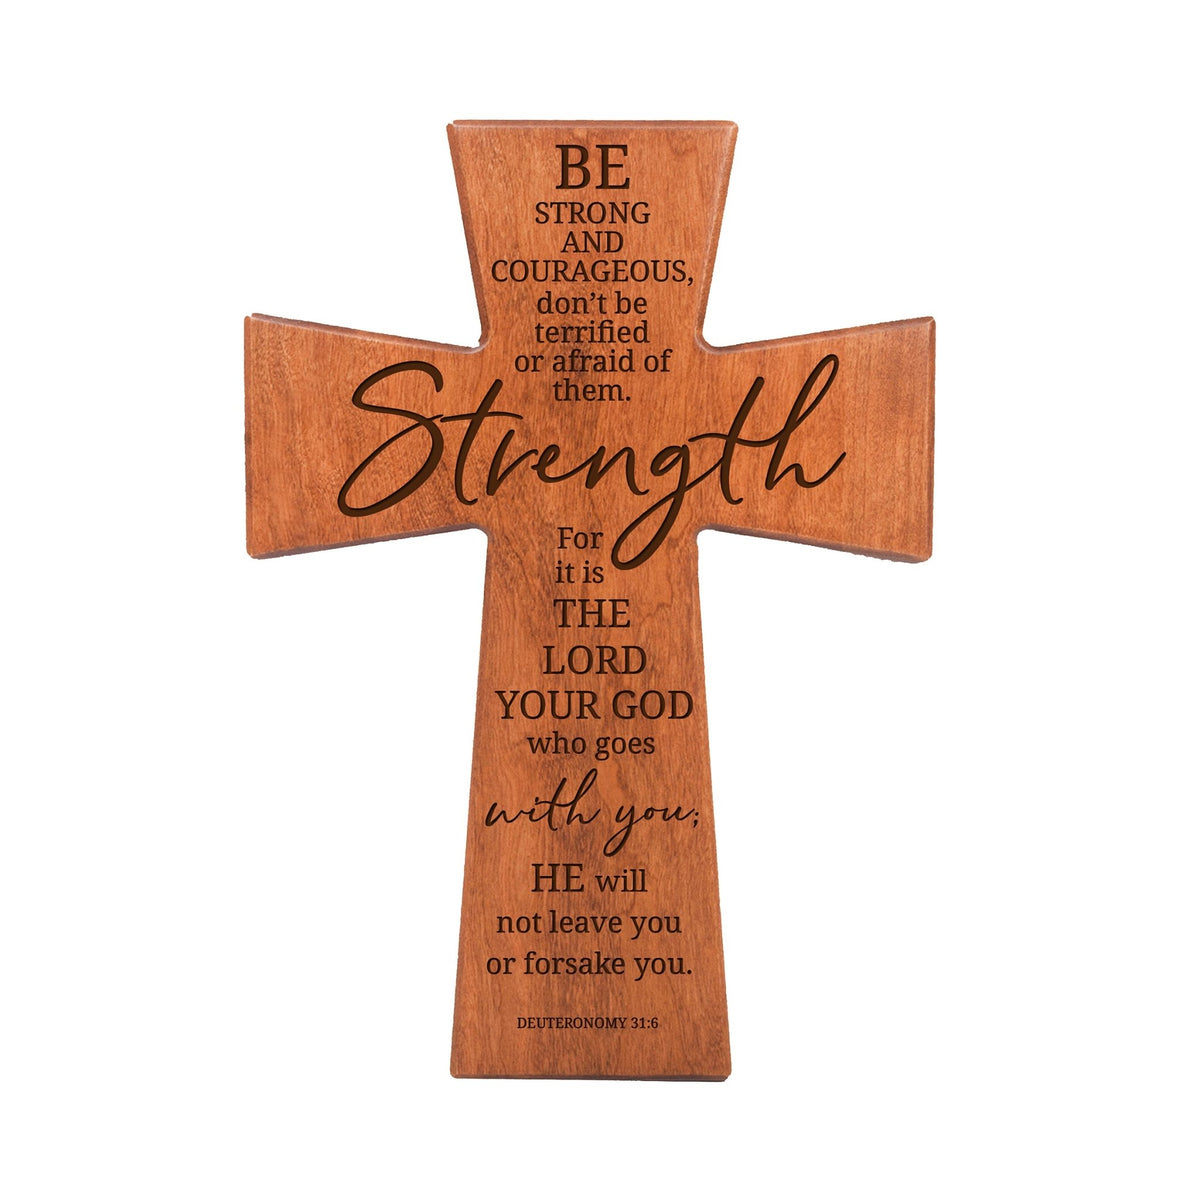 Custom Confirmation Wall Cross 12” x 17” x 0.5” - Be strong and courageous, don’t be terrified or afraid of them - LifeSong Milestones